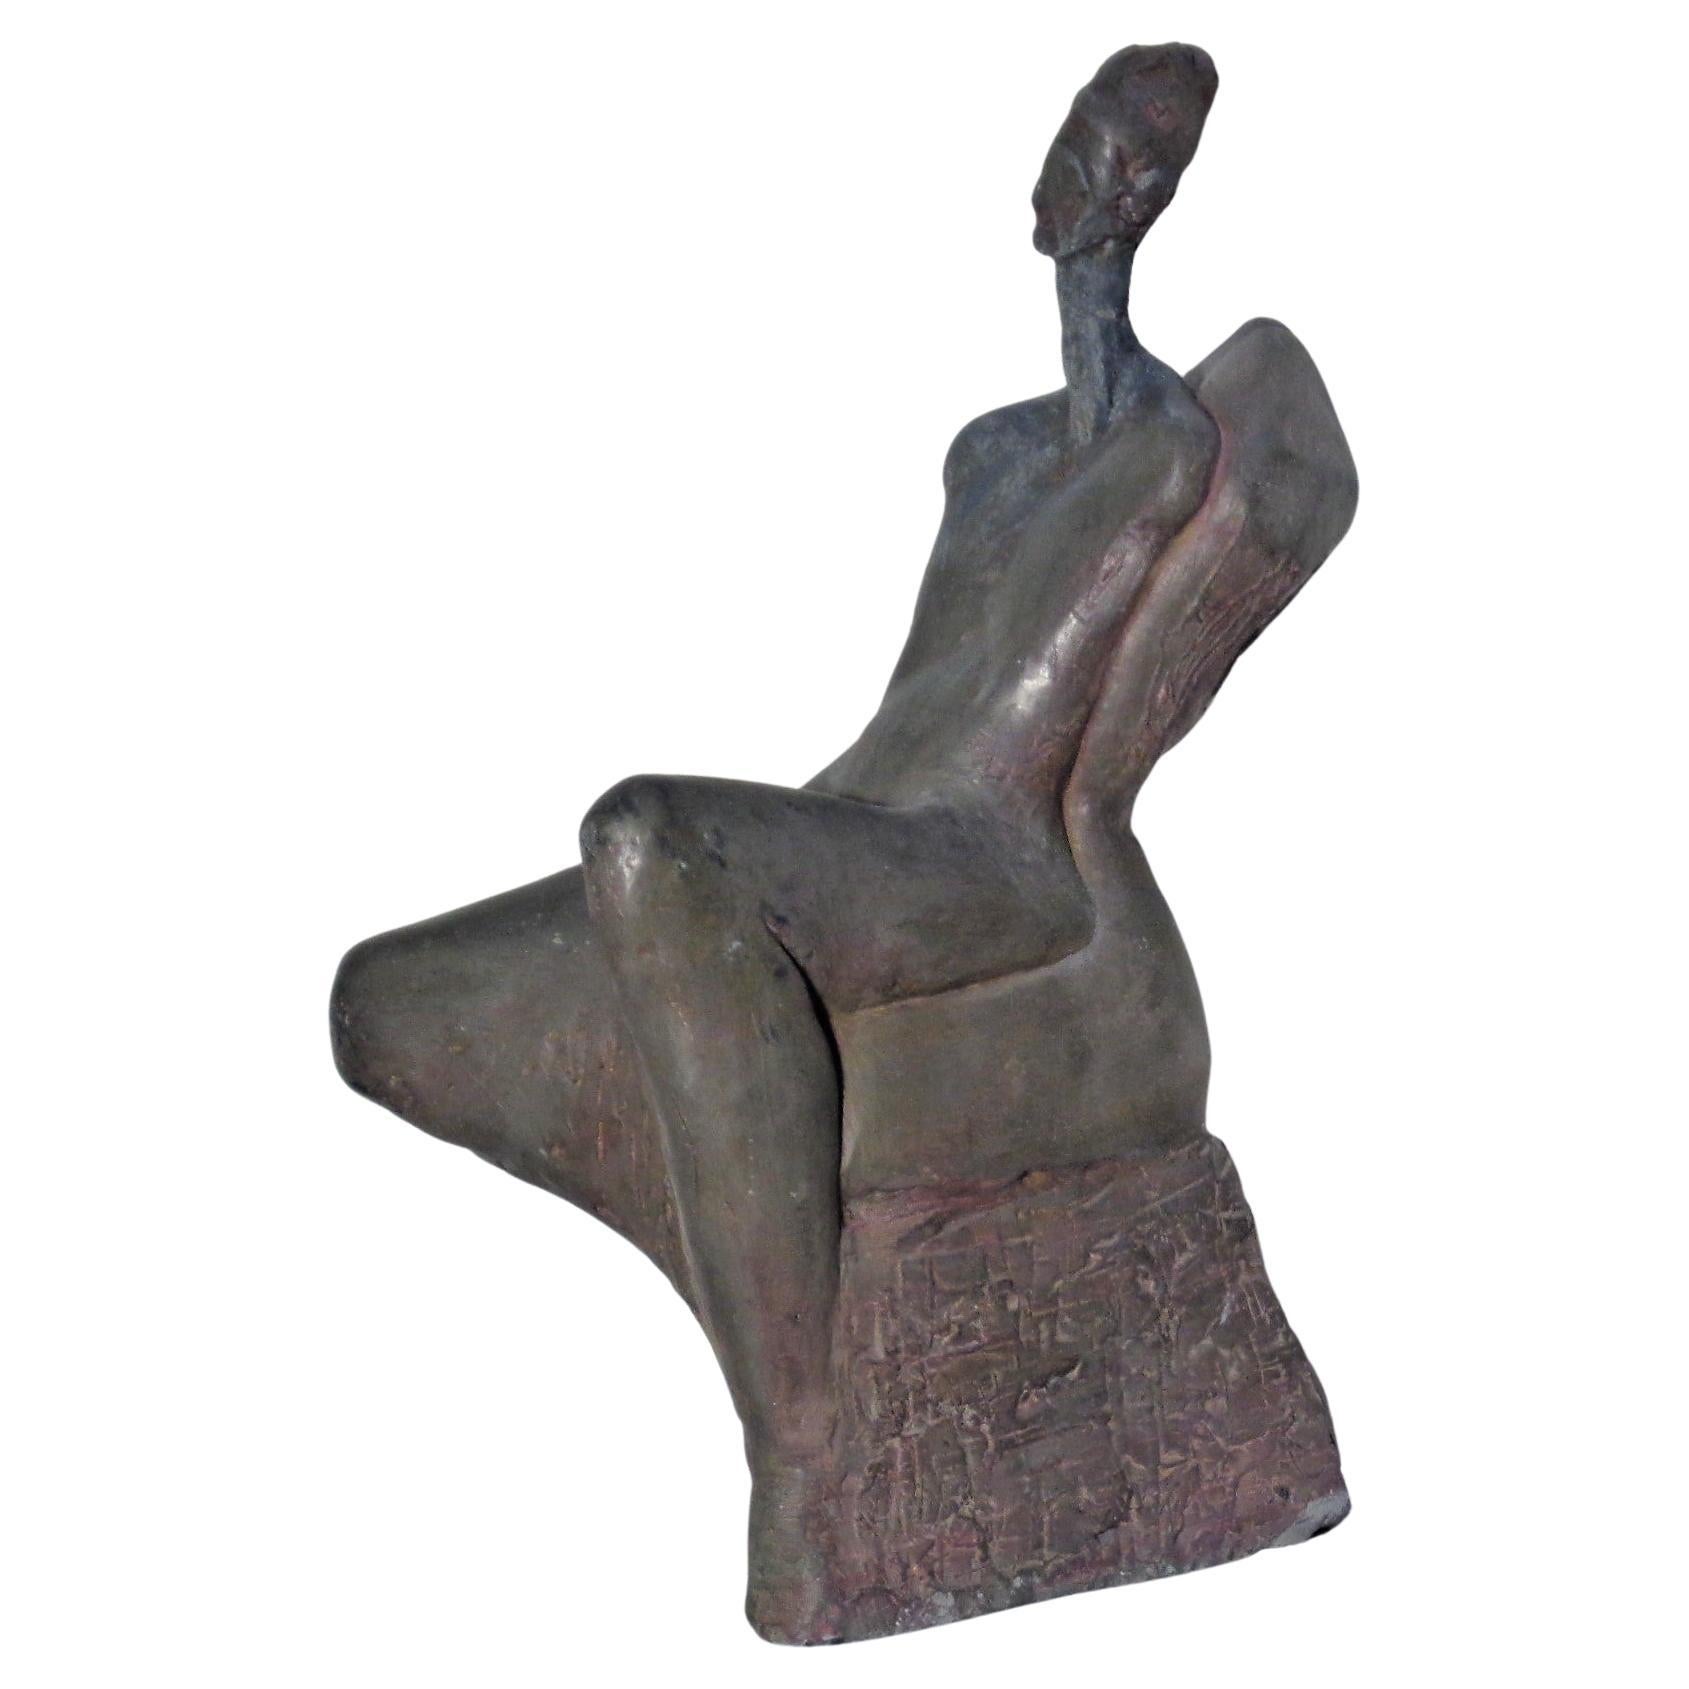 Modernist semi abstract sculpture of a seated nude woman in the style of Henry Moore, Hand built / hand tooled clay w/ burnished bronze gray glaze painted stone like surface, circa 1960-1970. Look at all pictures and read condition report in comment